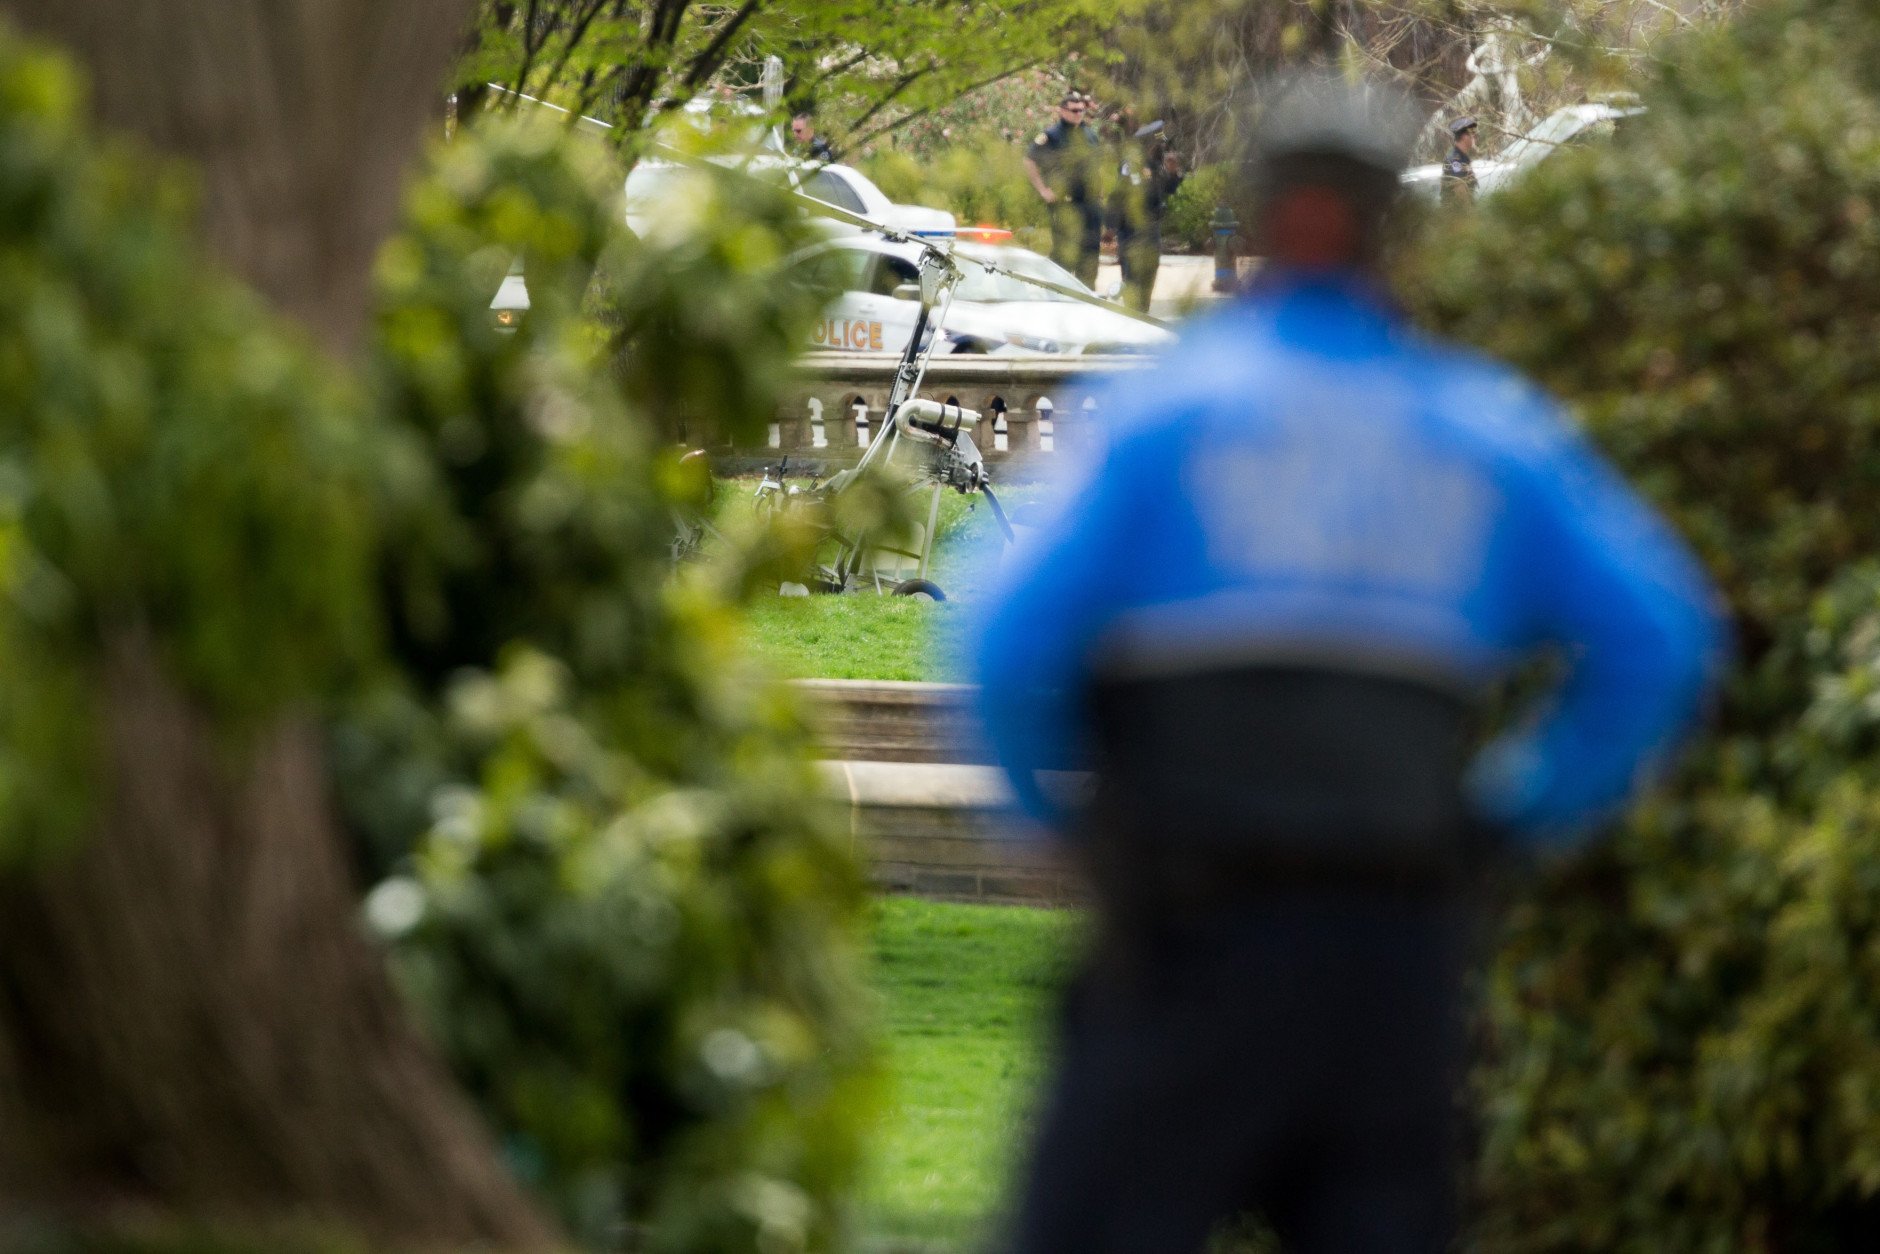 A small helicopter sits on the West Lawn of the Capitol in Washington, Wednesday, April 15, 2015. ?The U.S. Capitol Police is investigating a gyro copter with a single occupant that has landed on the grassy area of the West Lawn of t?he U.S. Capitol. The U.S. Capitol Police continues to investigate with one person detained and temporary street closures in the immediate area.  (AP Photo/Andrew Harnik)